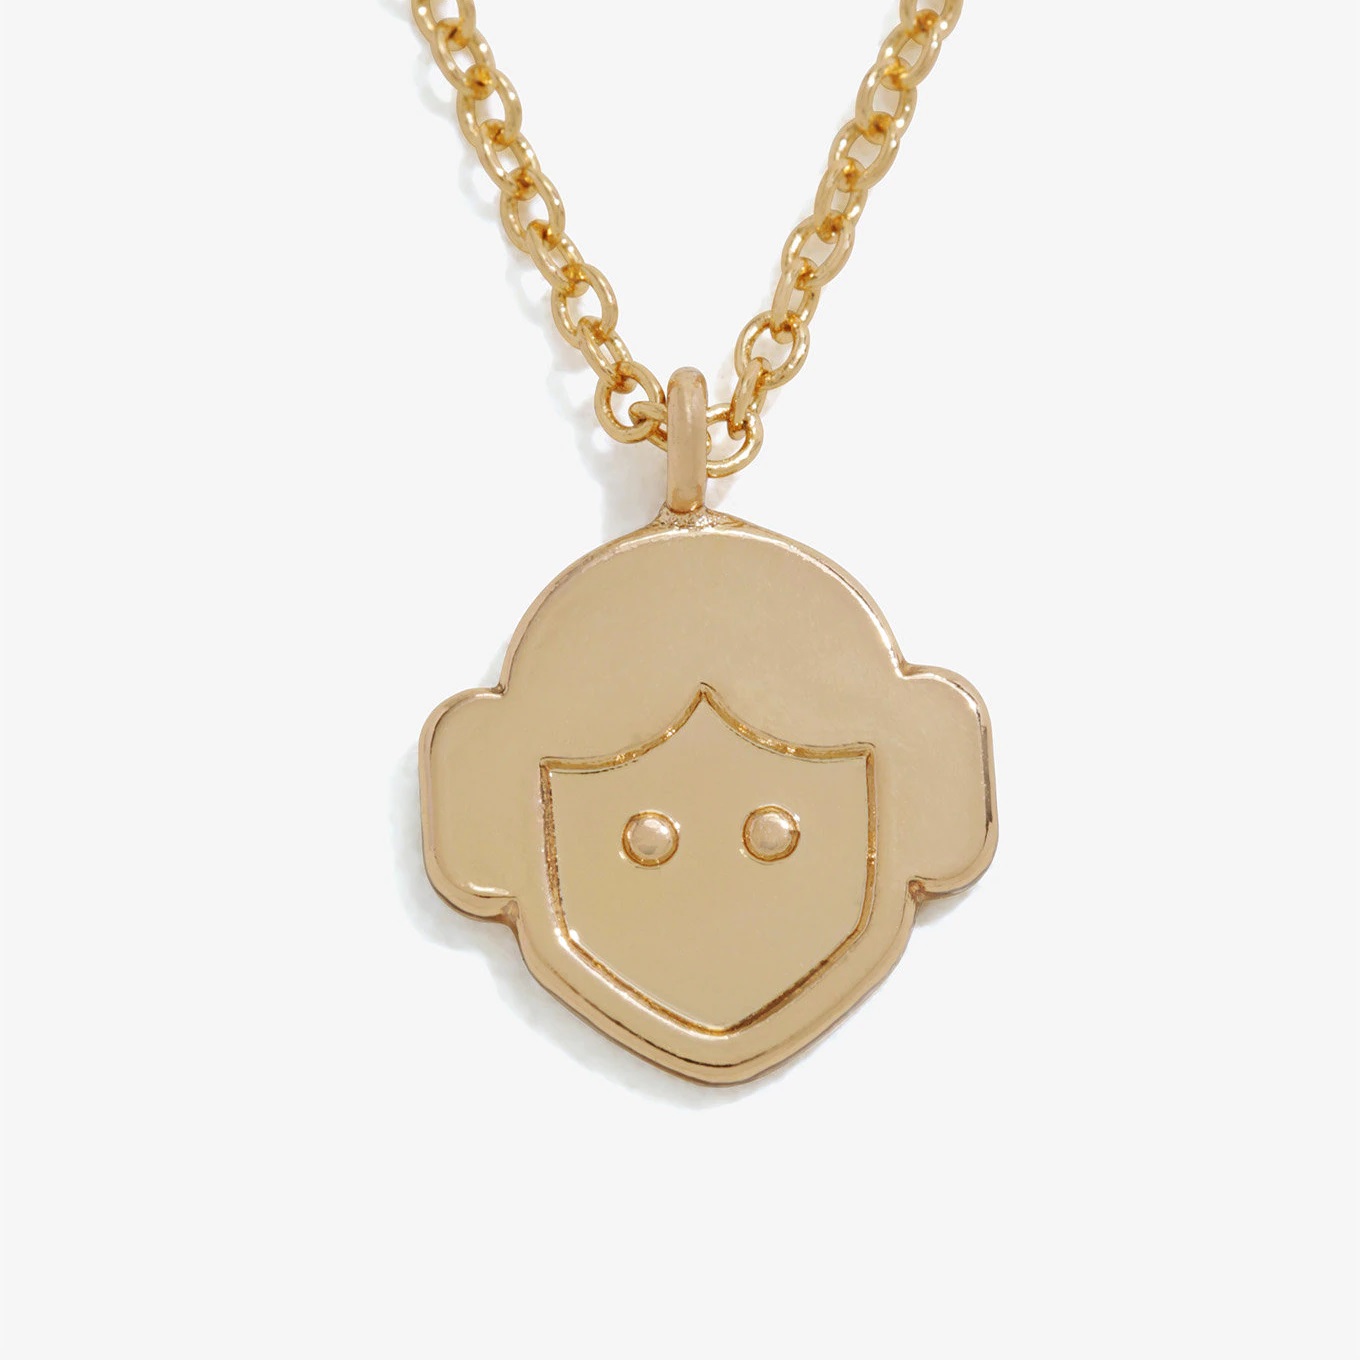 Love And Madness x Star Wars Princess Leia Emoji Necklace at Her Universe